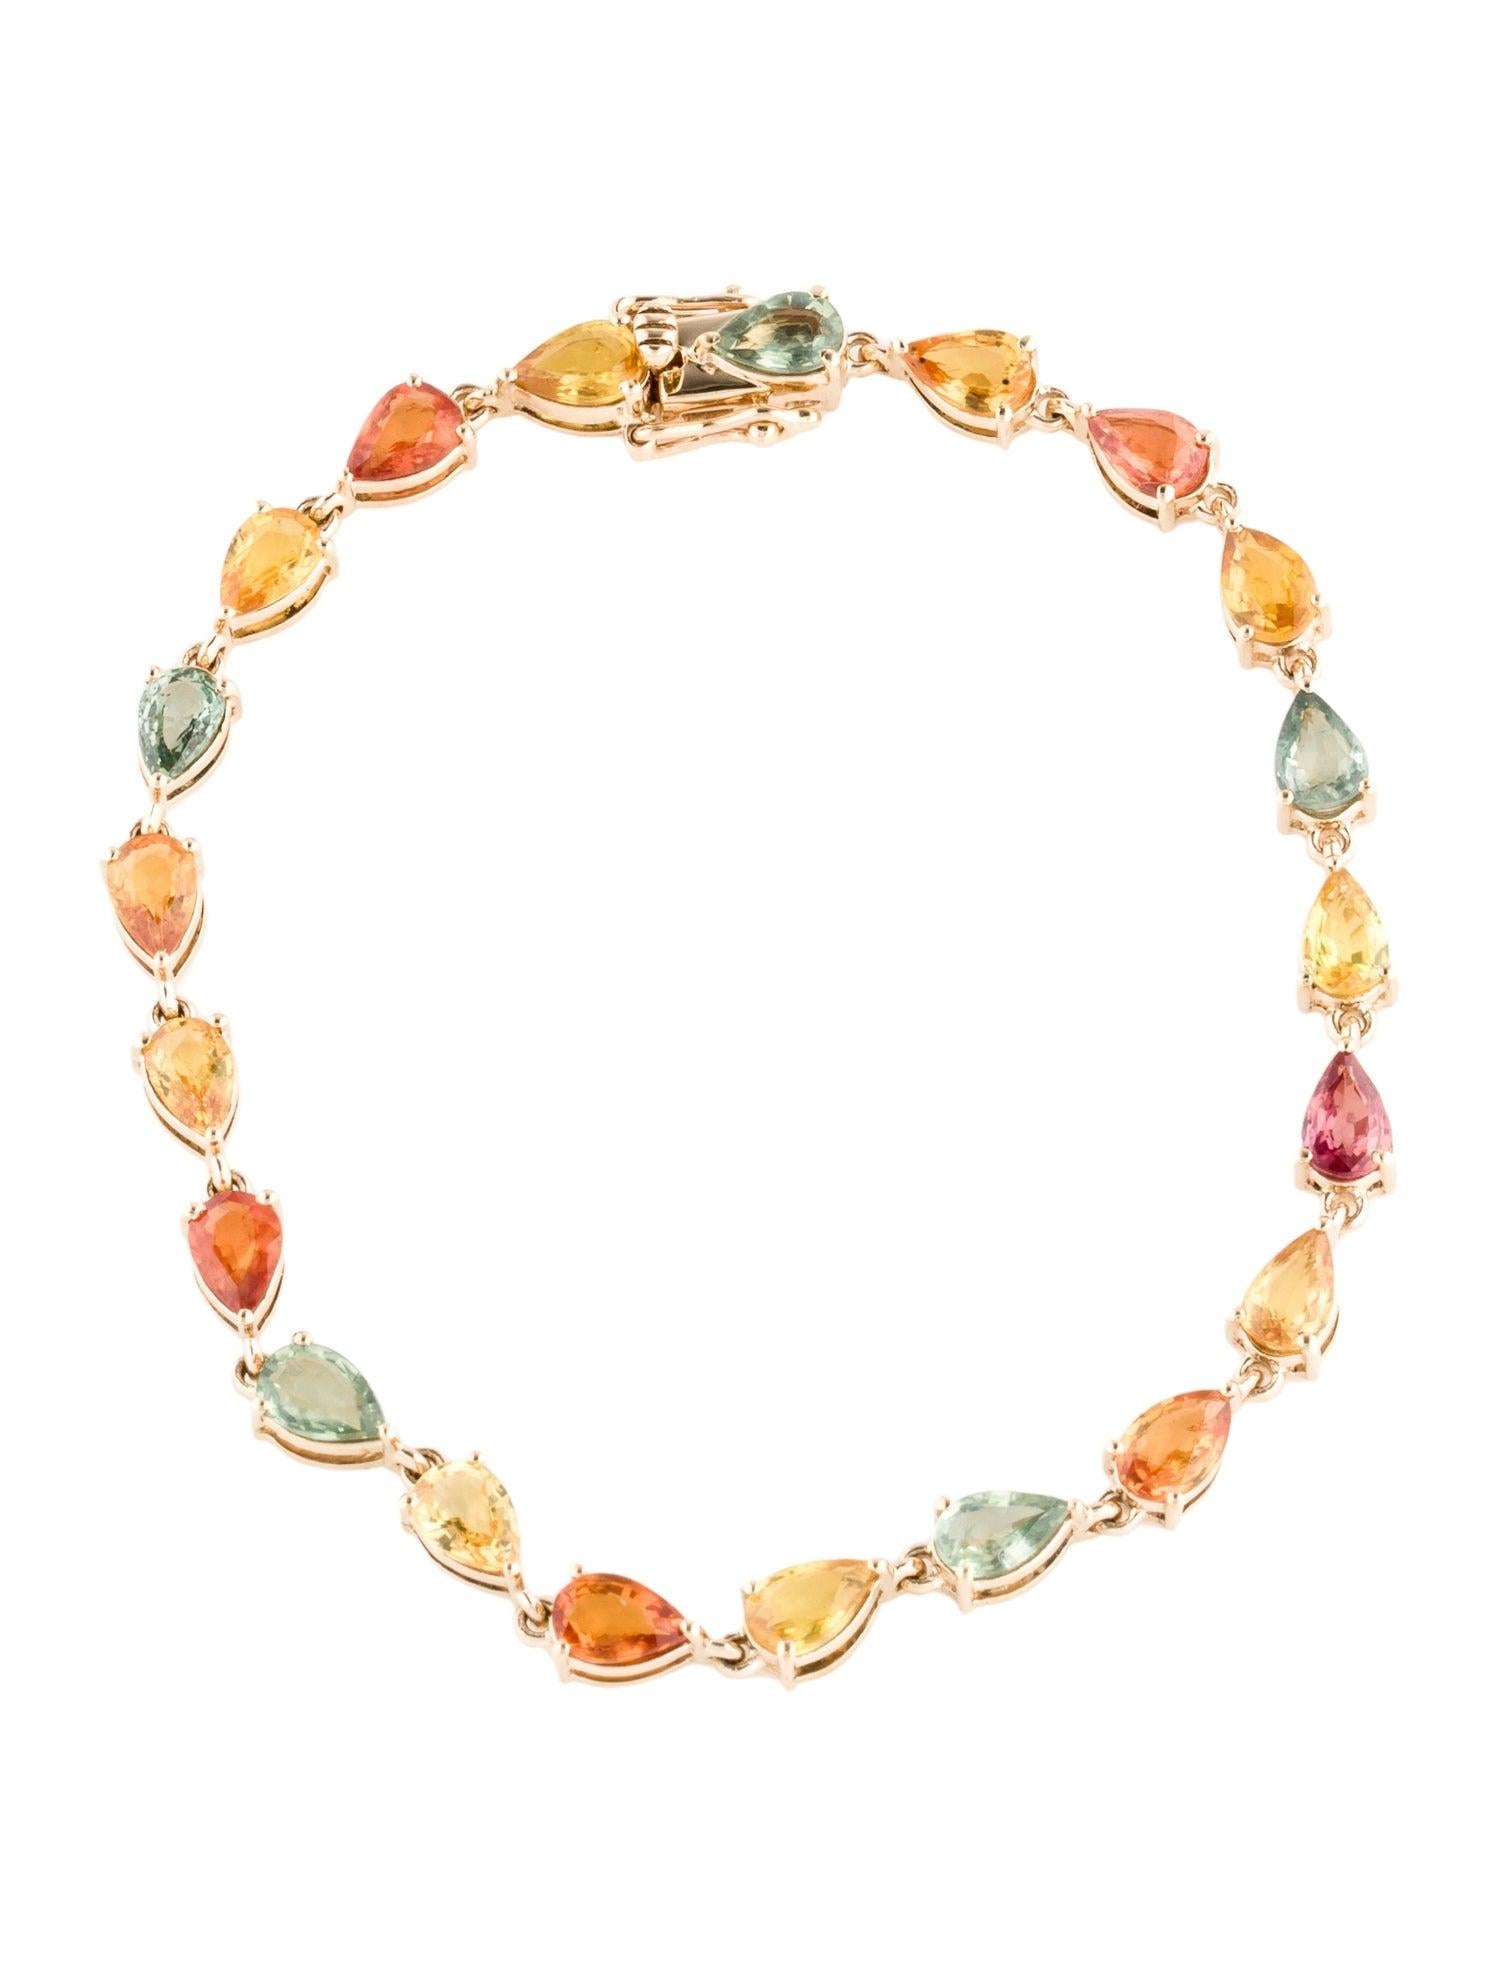 Introducing an exquisite 14K Yellow Gold Link Bracelet, beautifully adorned with a stunning array of 9.90 carats of Pear Brilliant Sapphires. This captivating piece features a vibrant selection of sapphires in orange, yellow, green, and blue hues,